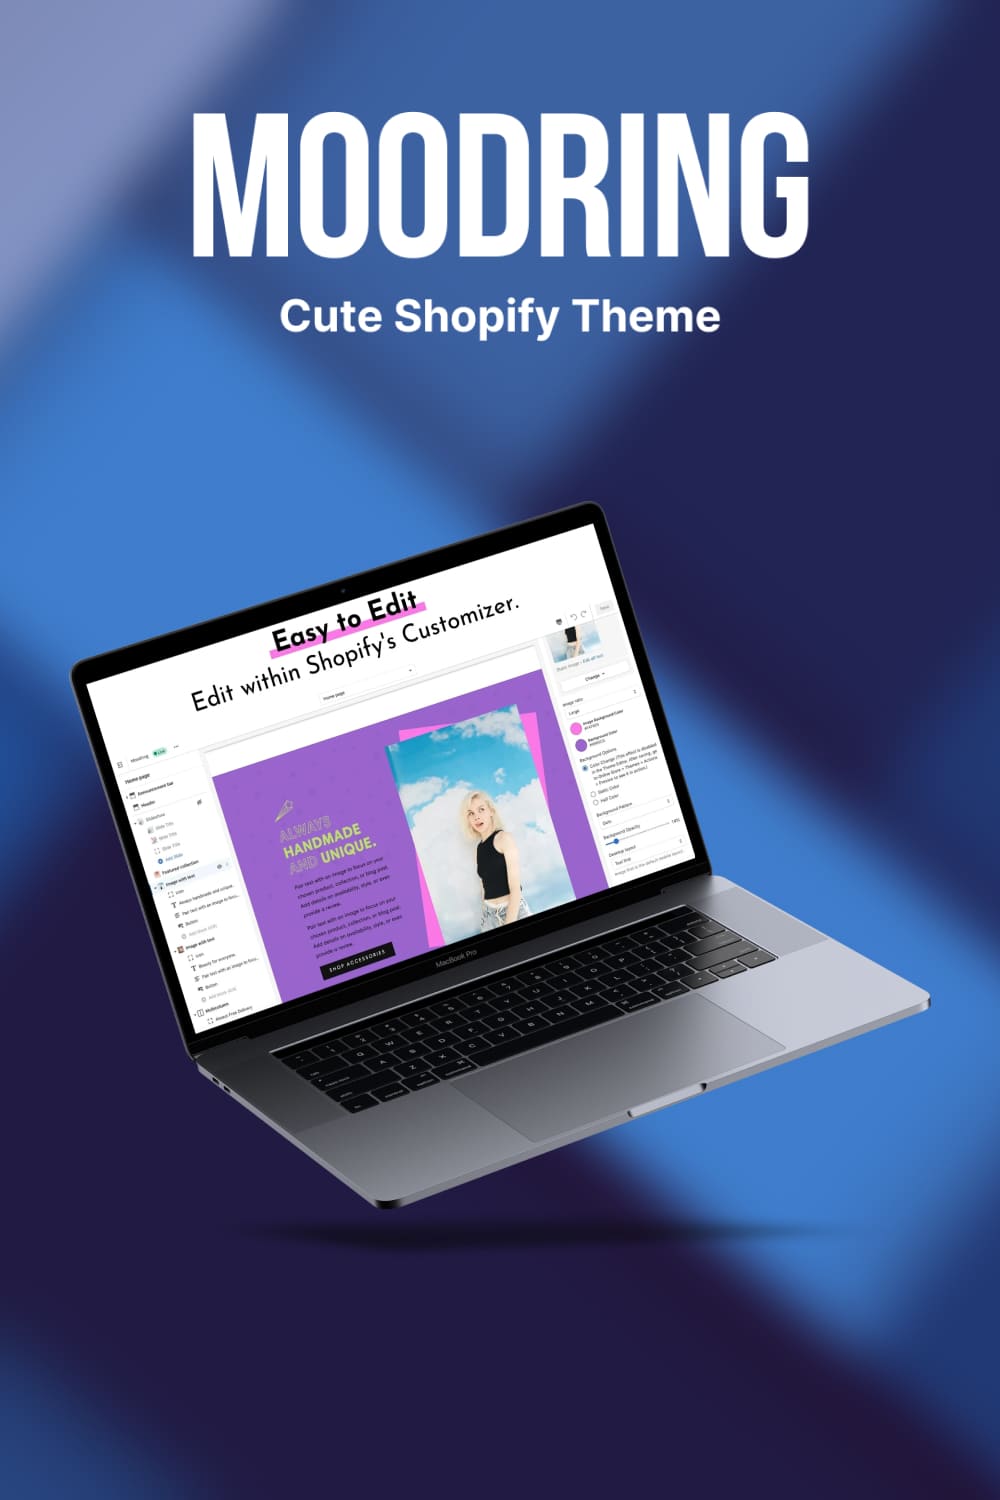 Preview Moodring: Cute Shopify Theme on the laptop..